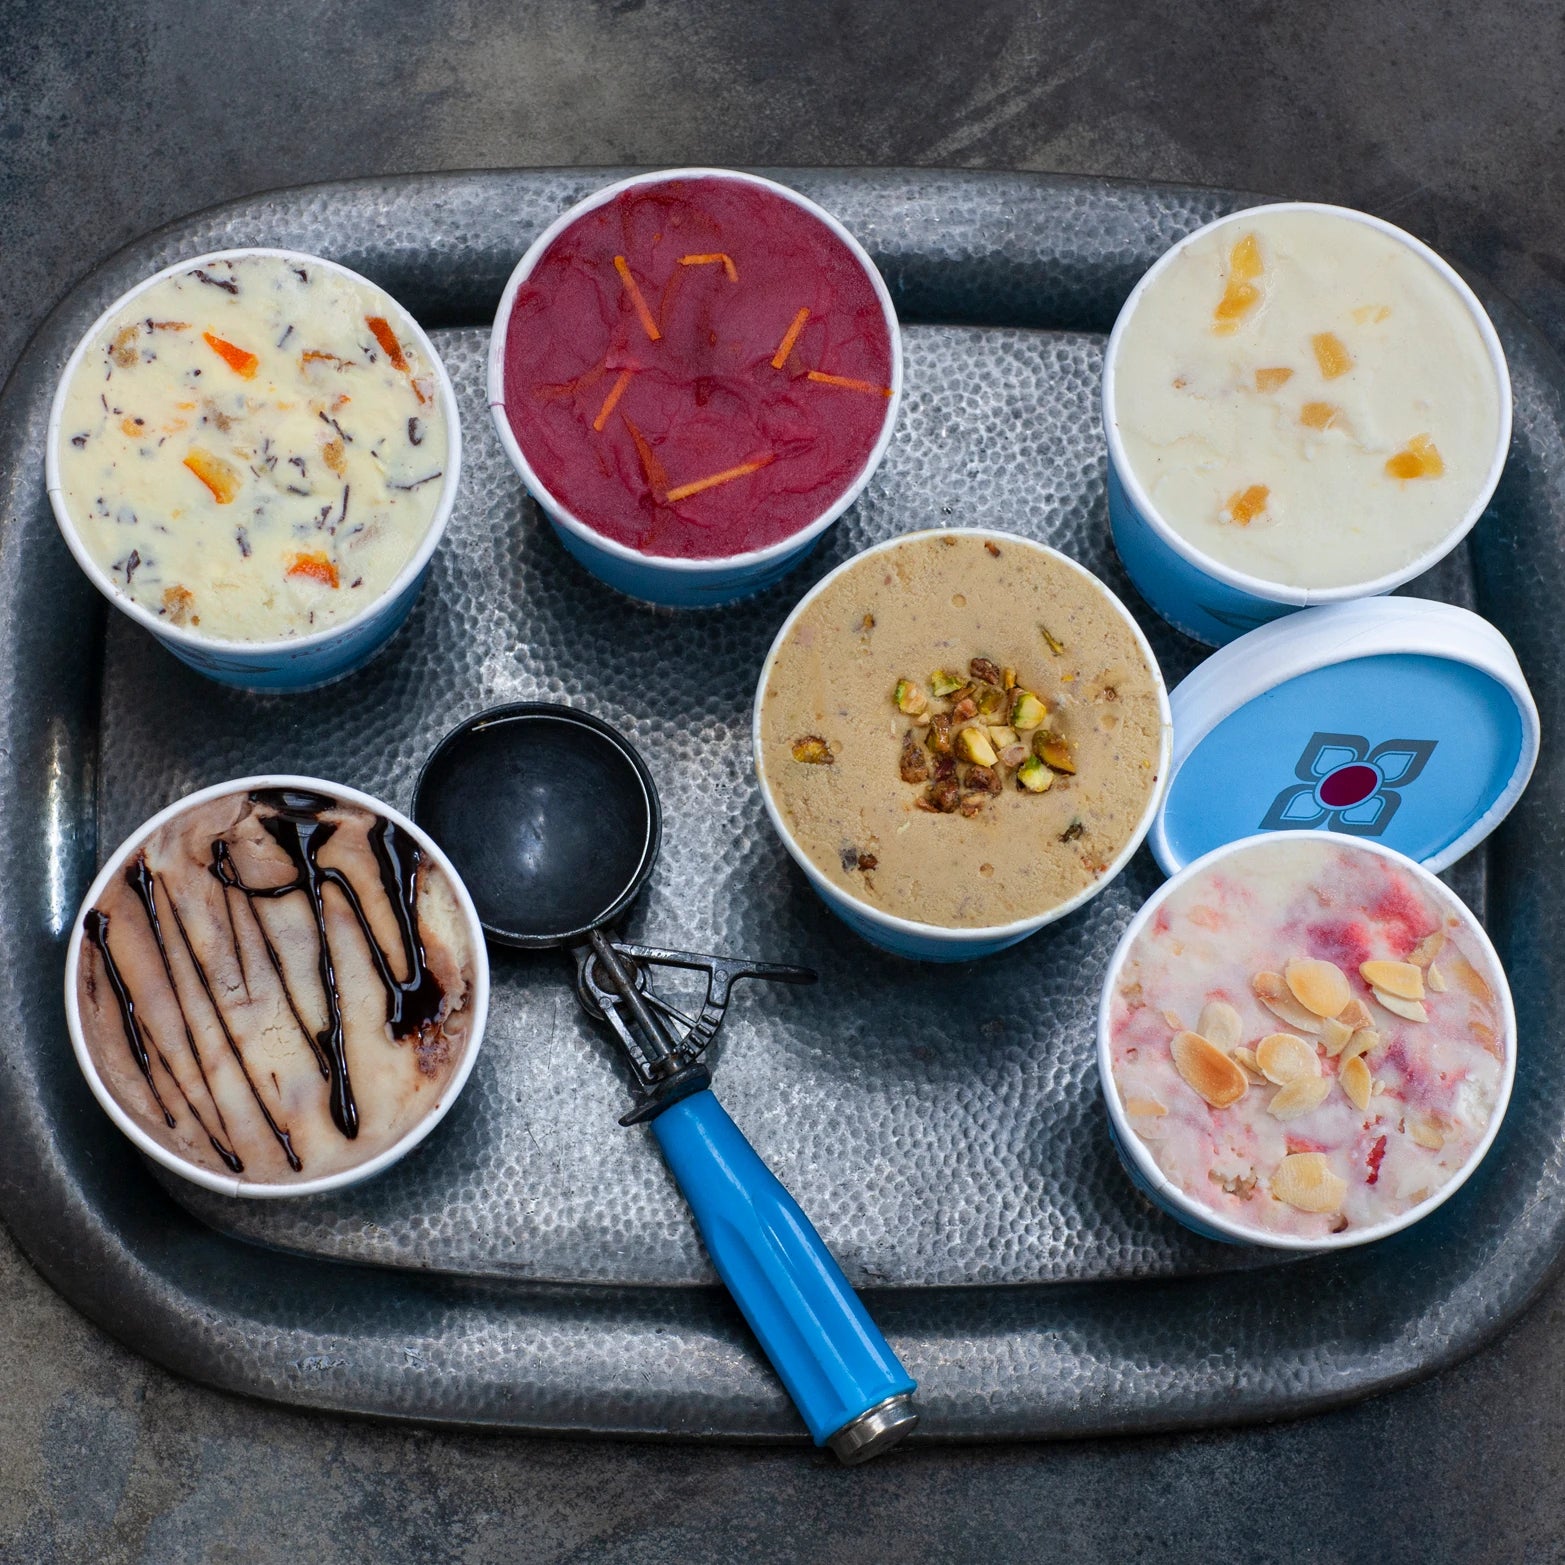 Medium tubs of ice cream and sorbet on a tray